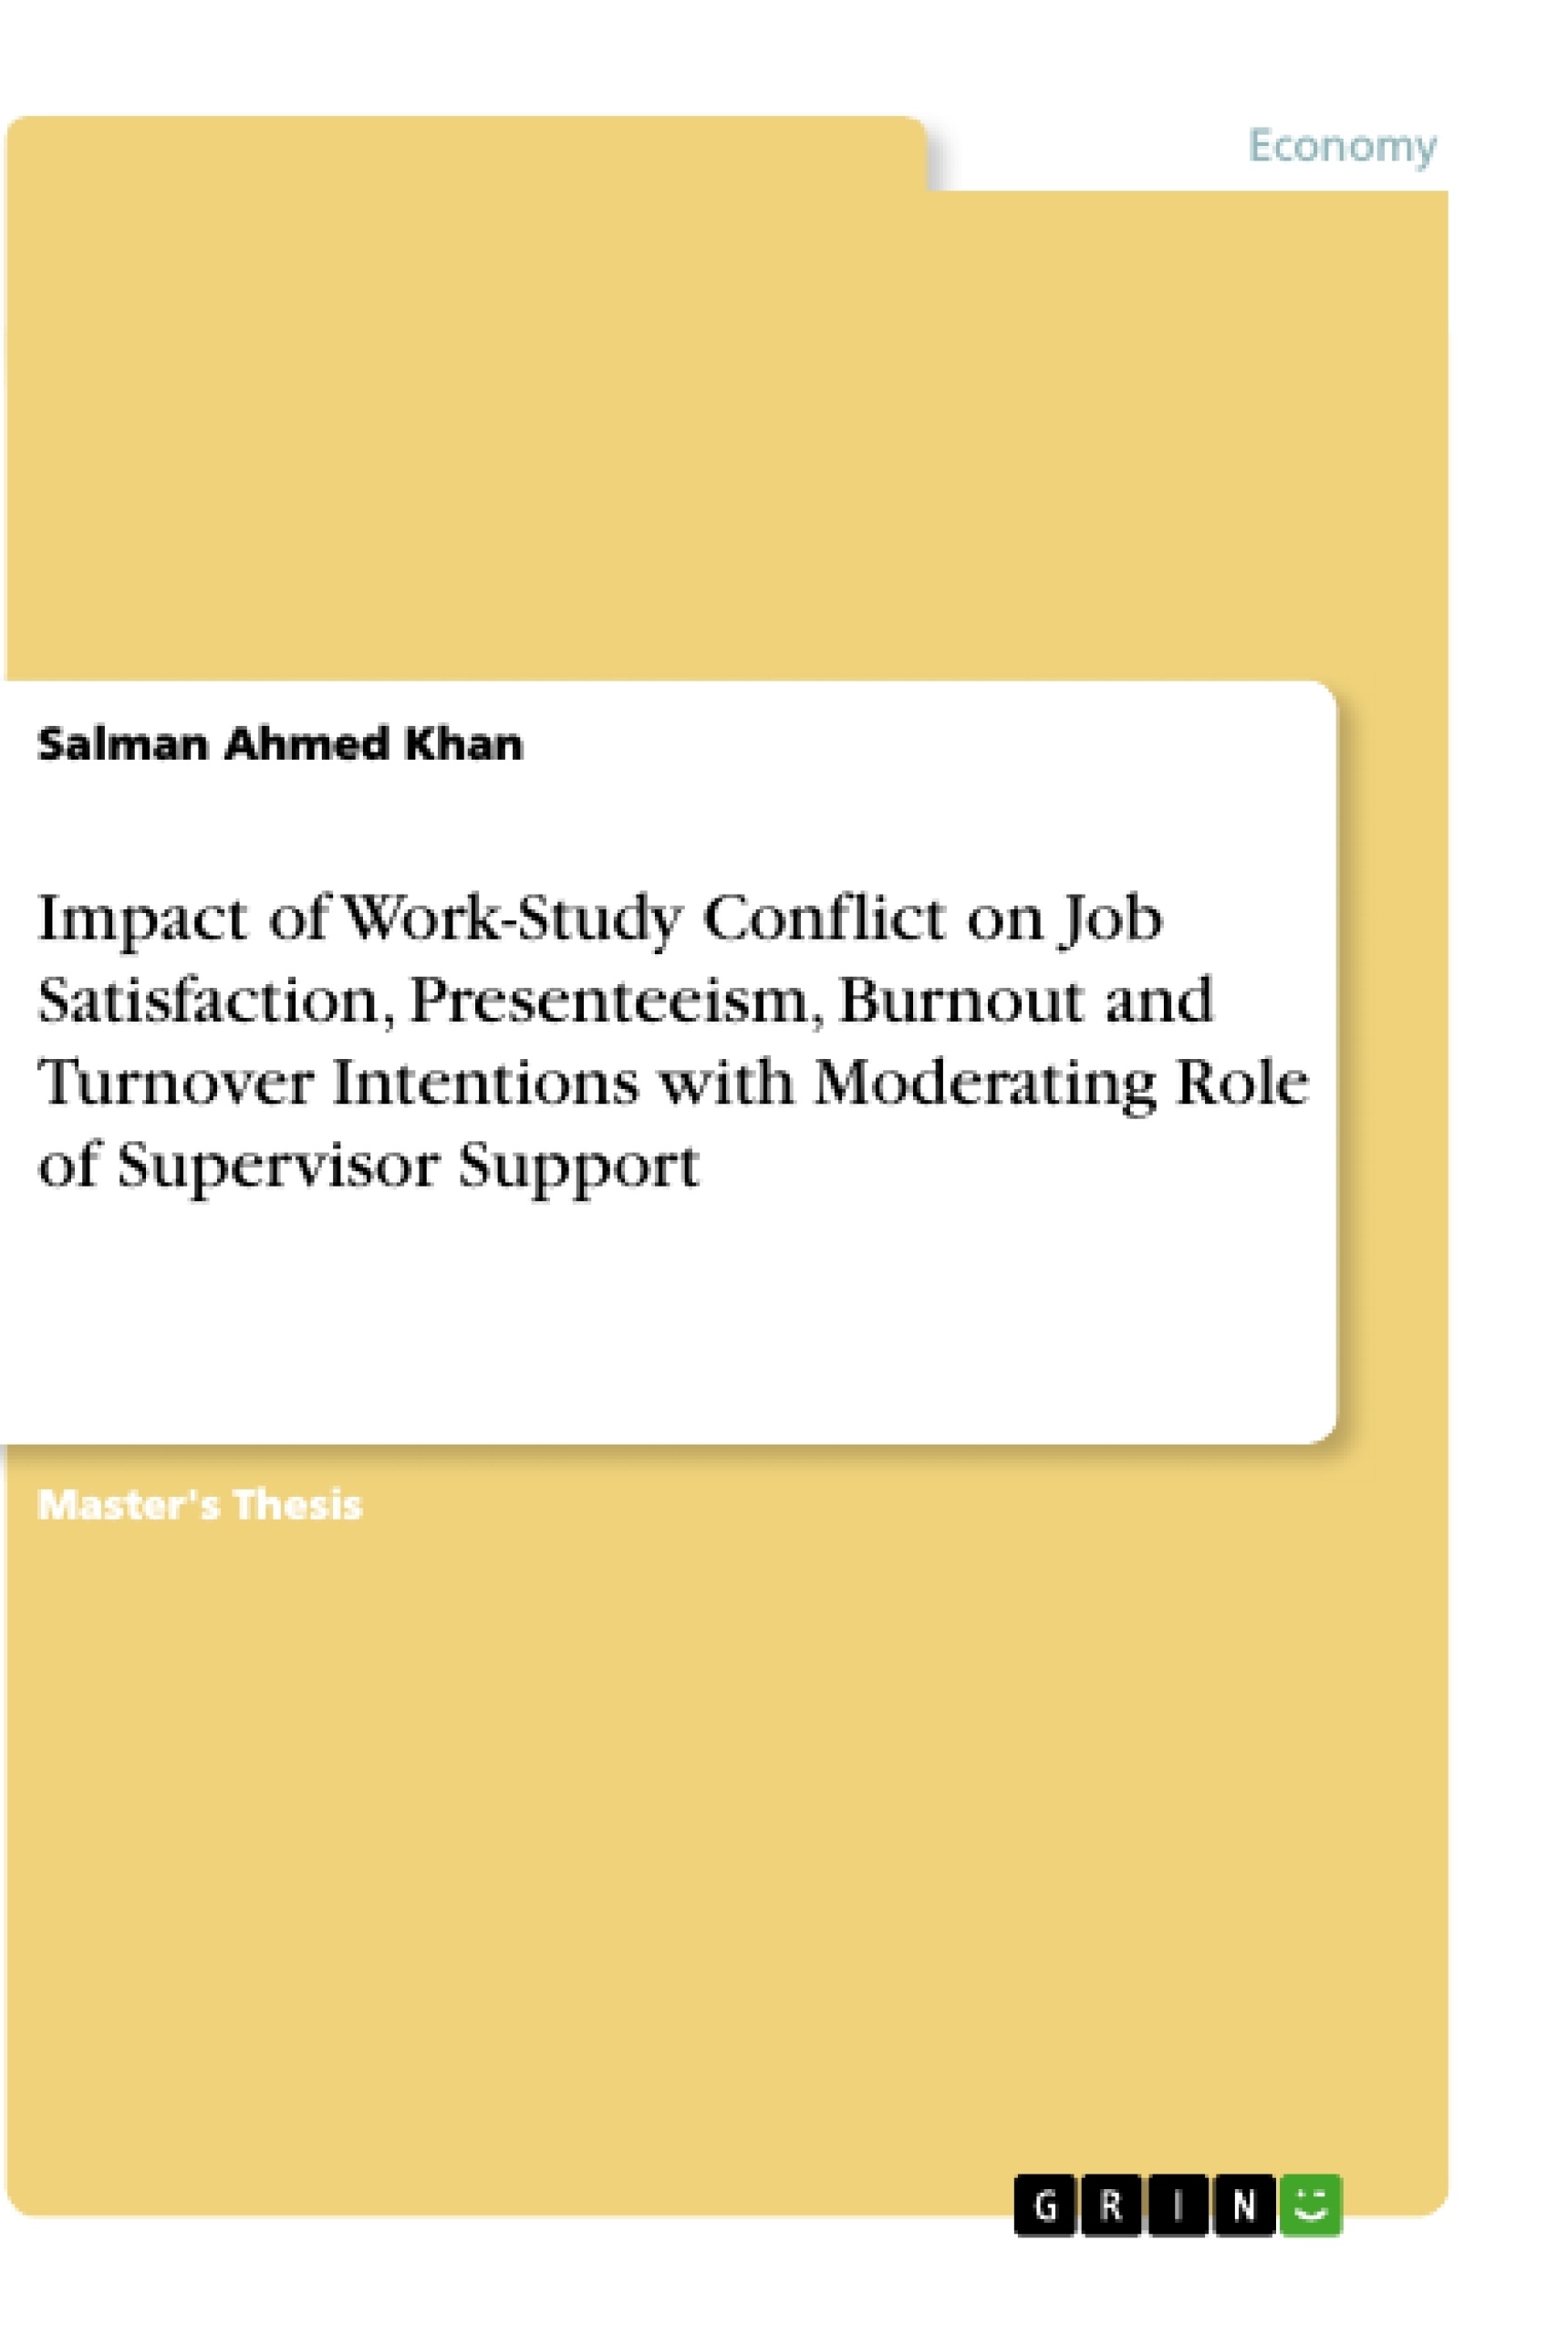 Title: Impact of Work-Study Conflict on Job Satisfaction, Presenteeism, Burnout and Turnover Intentions with Moderating Role of Supervisor Support